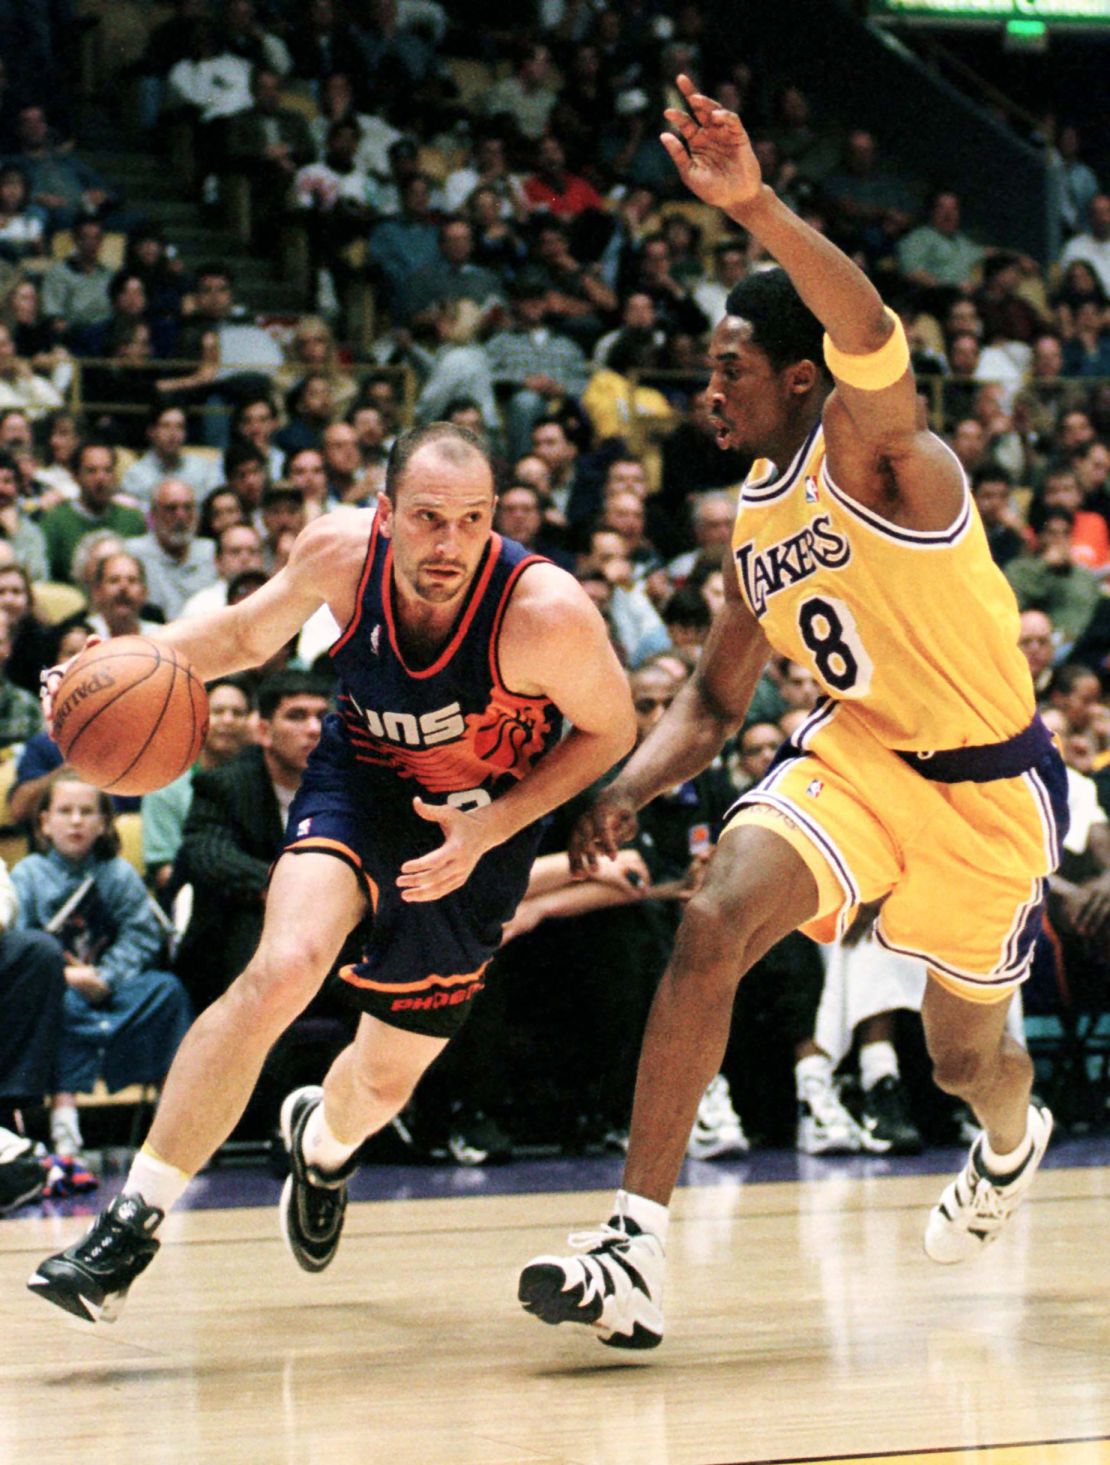 The Phoenix Suns Rex Chapman (L) heads to the basket as the Los Angeles Lakers Kobe Bryant defends.